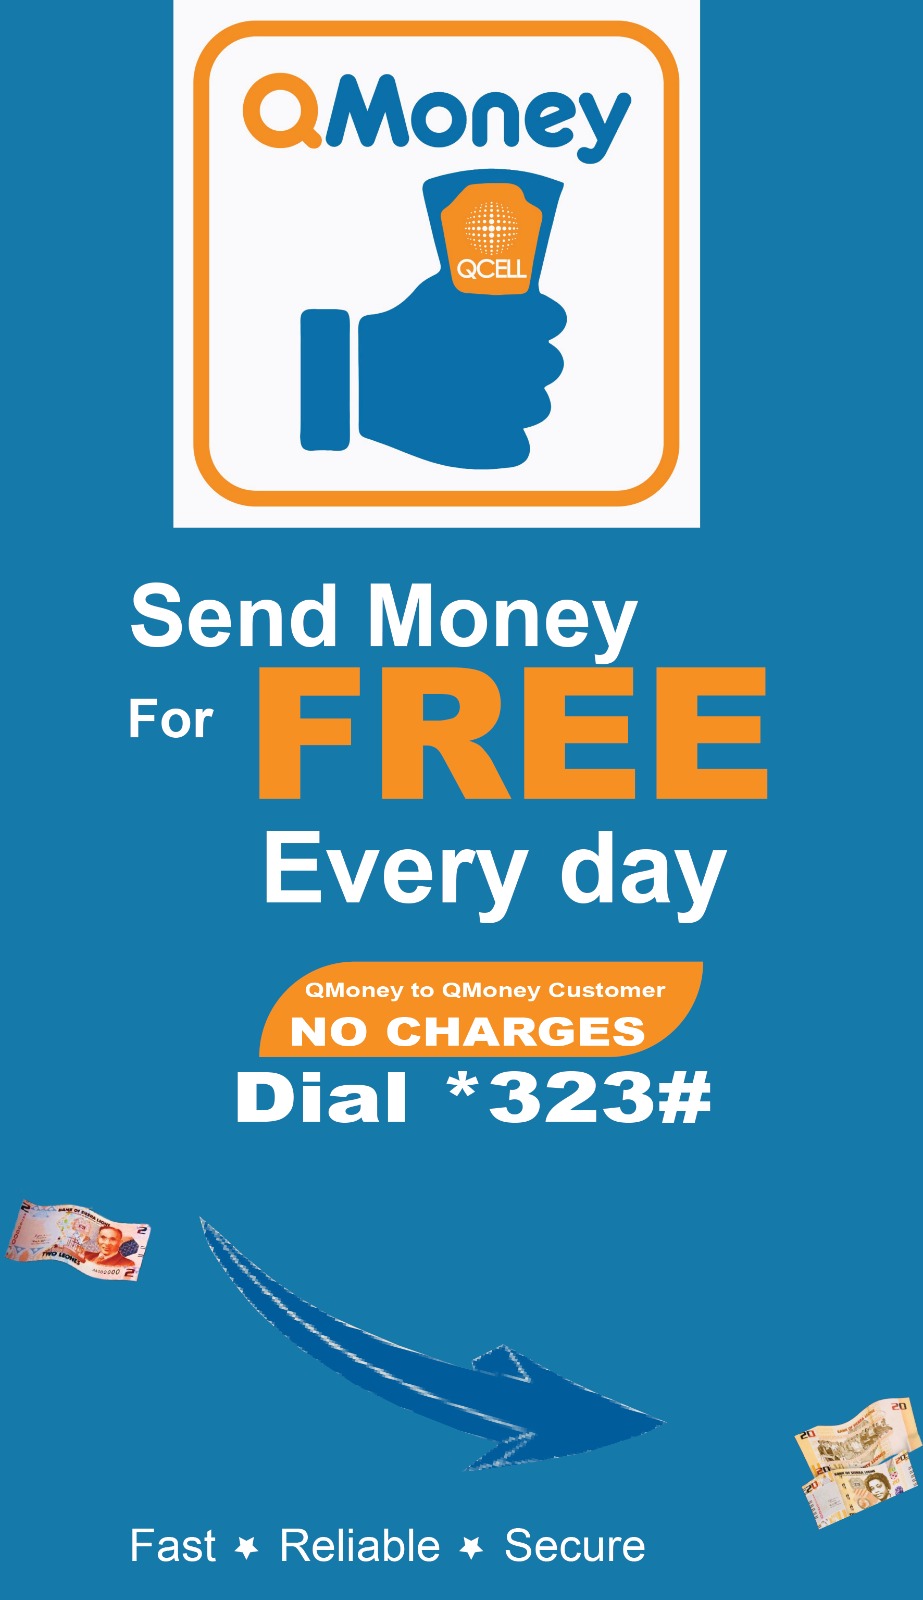 DIAL *323# AND SEND QMONEY FOR FREE EVERYDAY ....Fast, Reliable and Secure